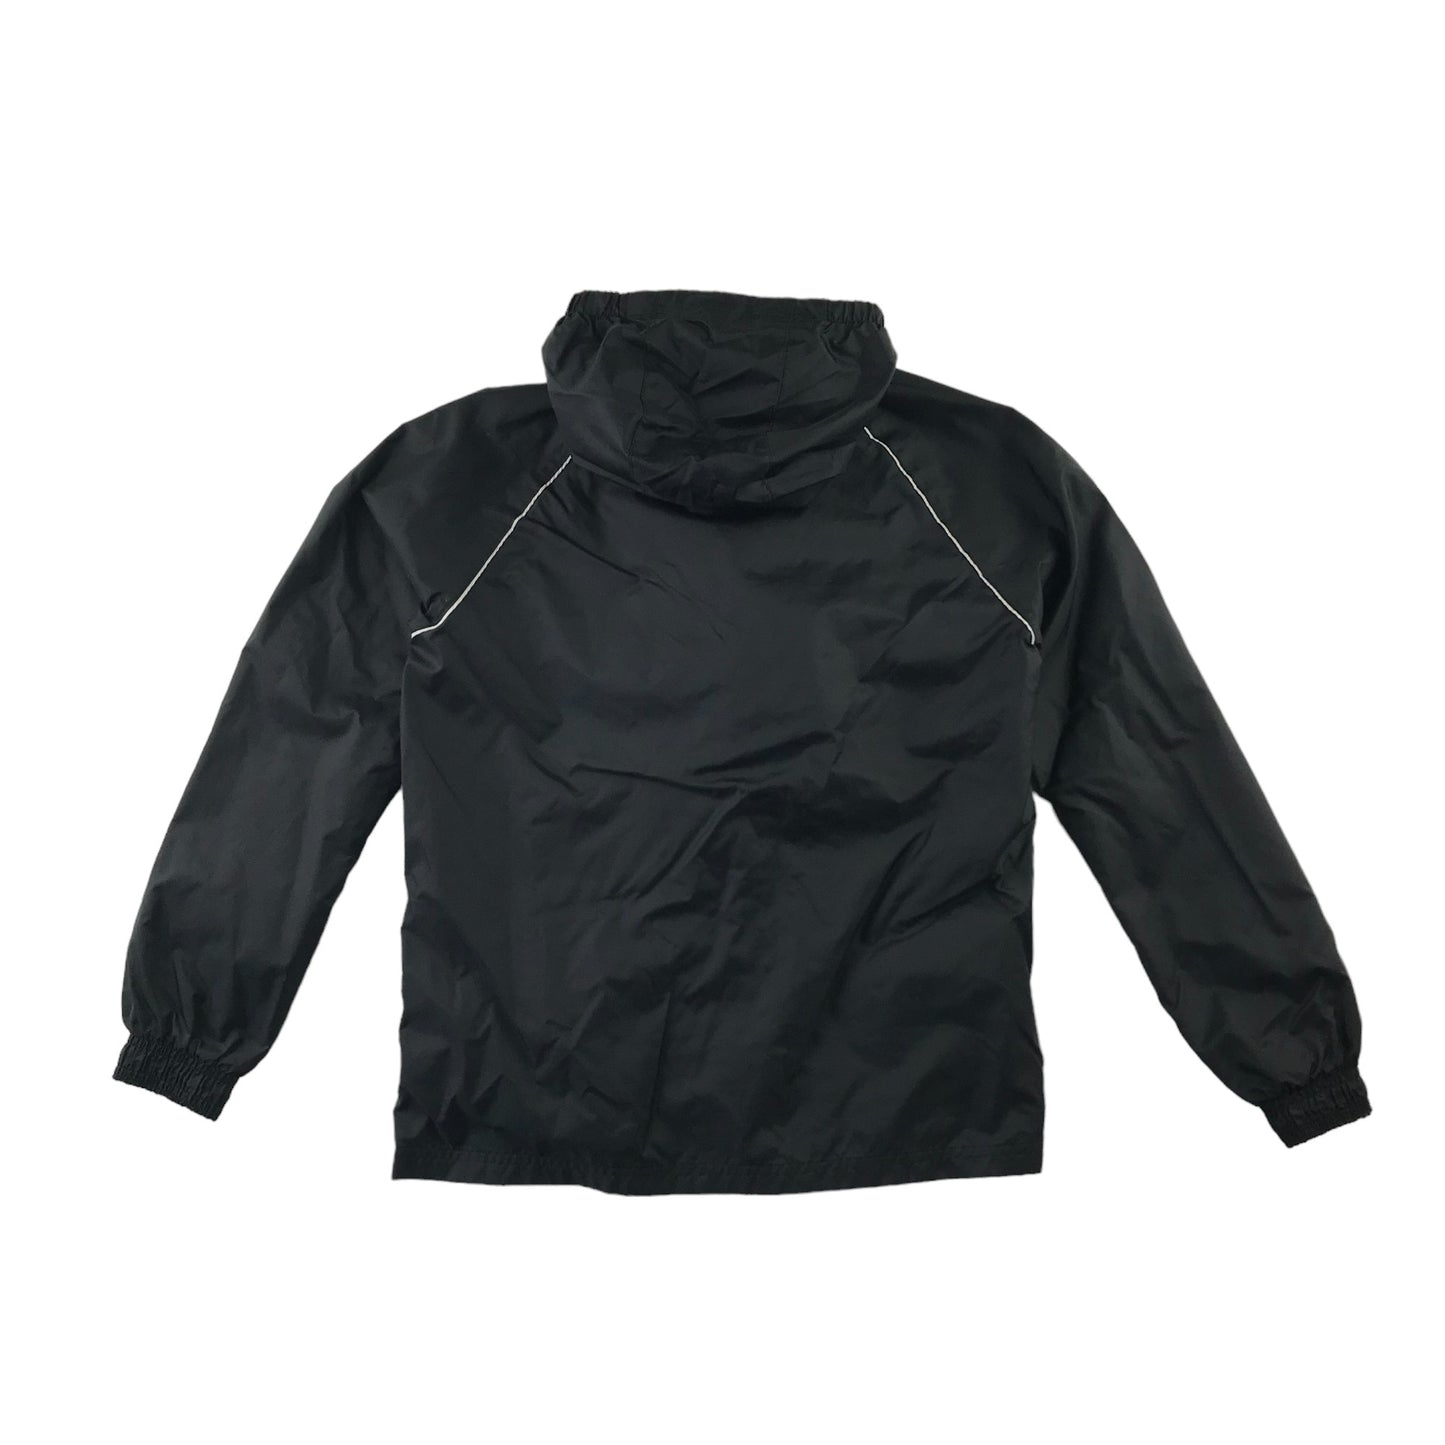 Adidas light jacket 9-10 years black with white details